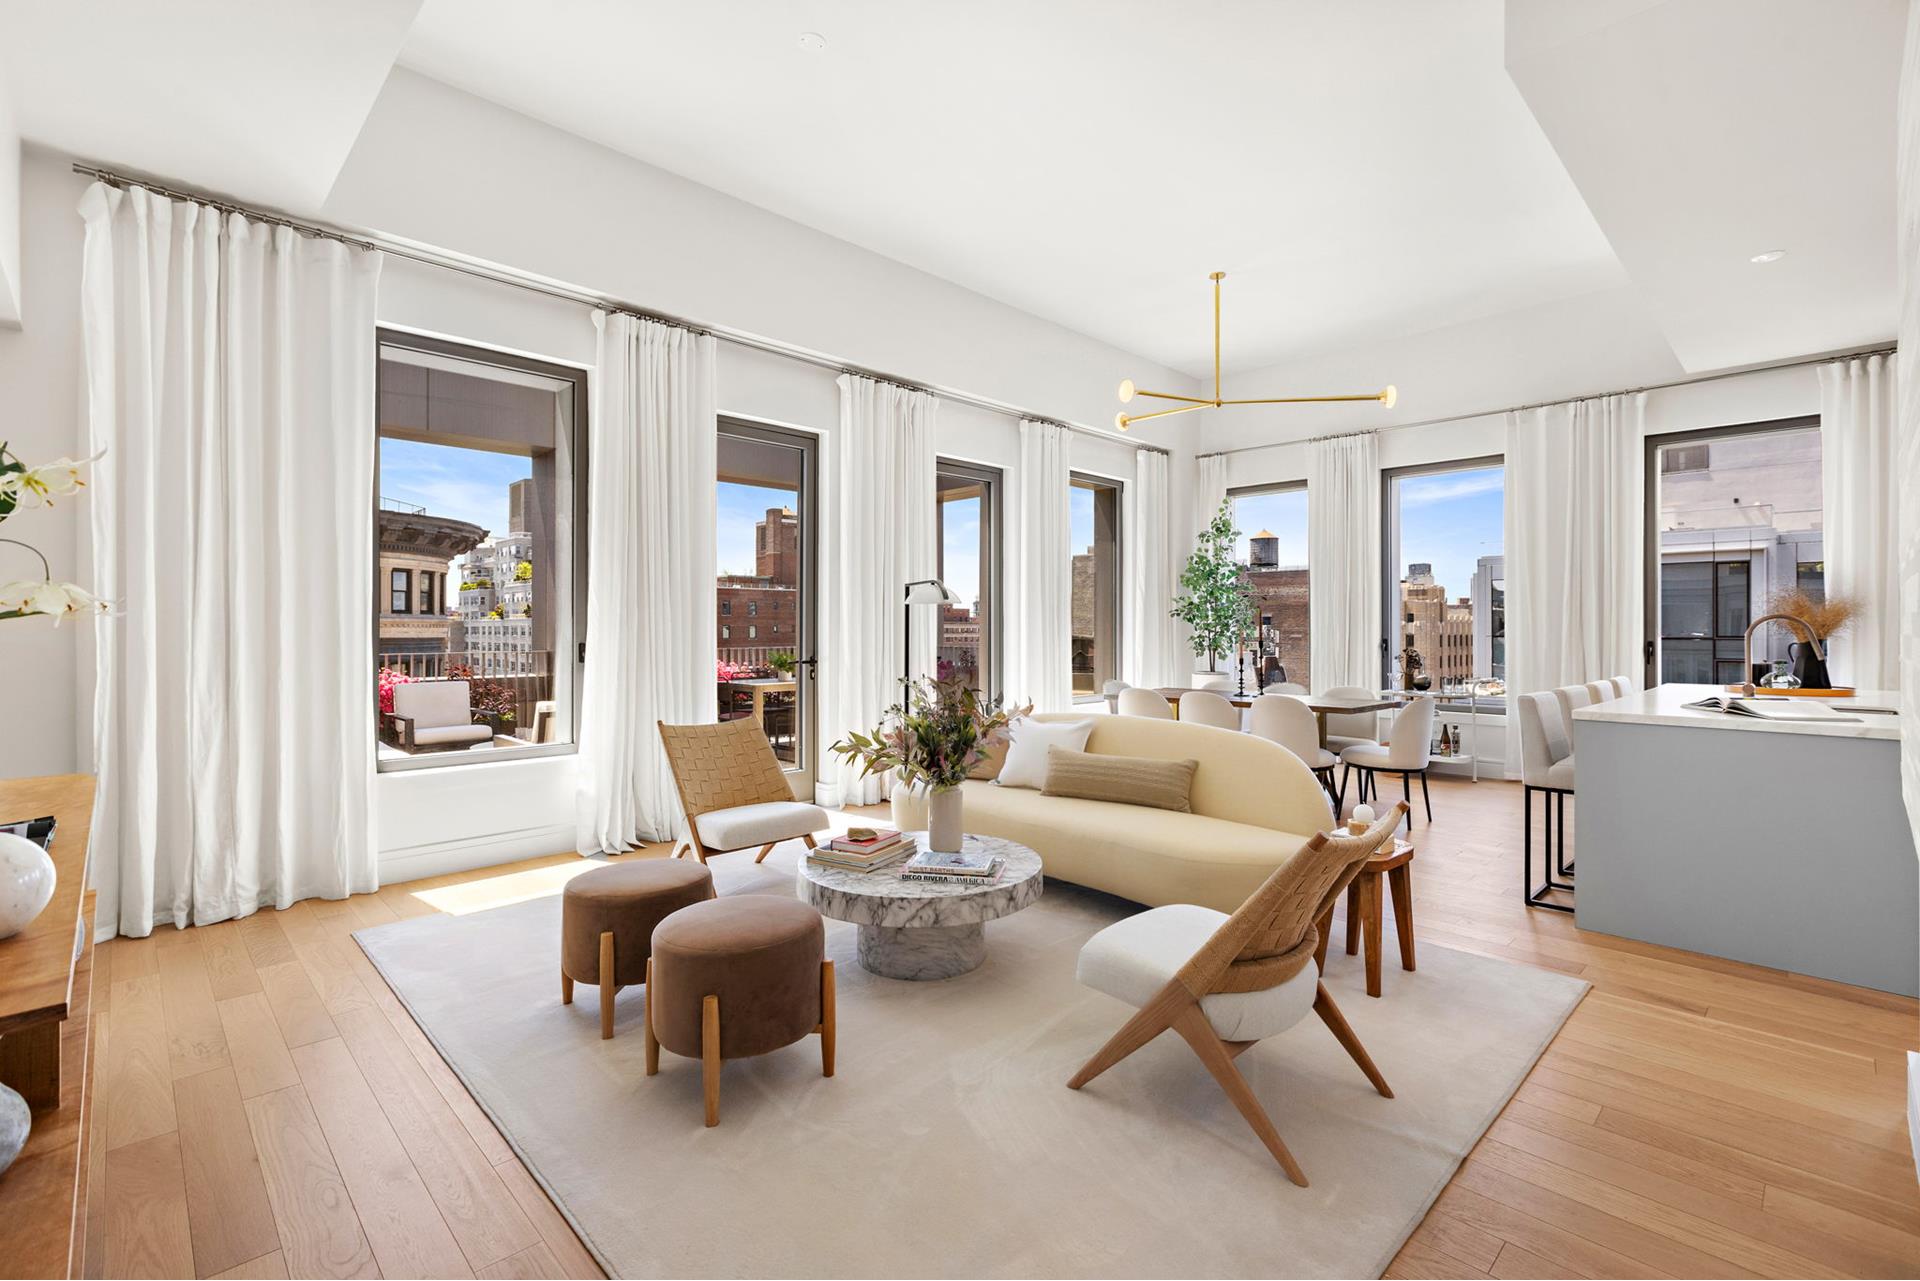 540 6th Avenue Phb, Flatiron, Downtown, NYC - 3 Bedrooms  
3.5 Bathrooms  
4 Rooms - 